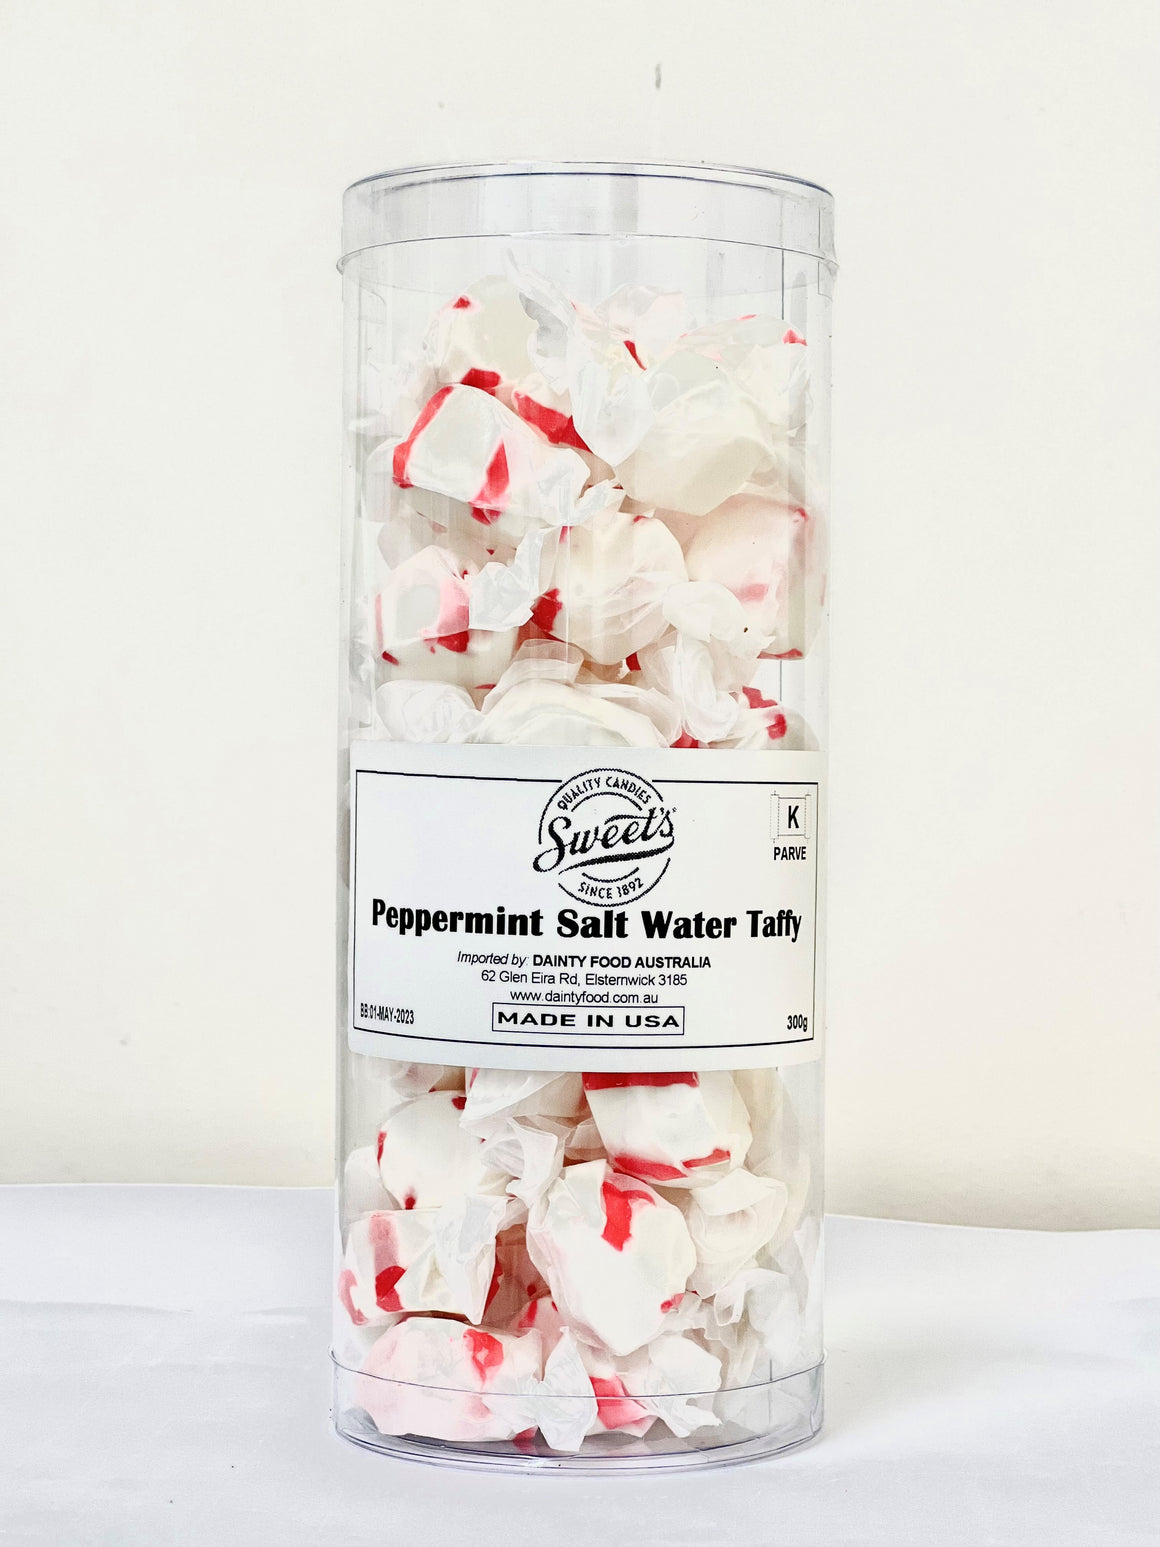 SWEETS TAFFY PEPPERMINT 300G